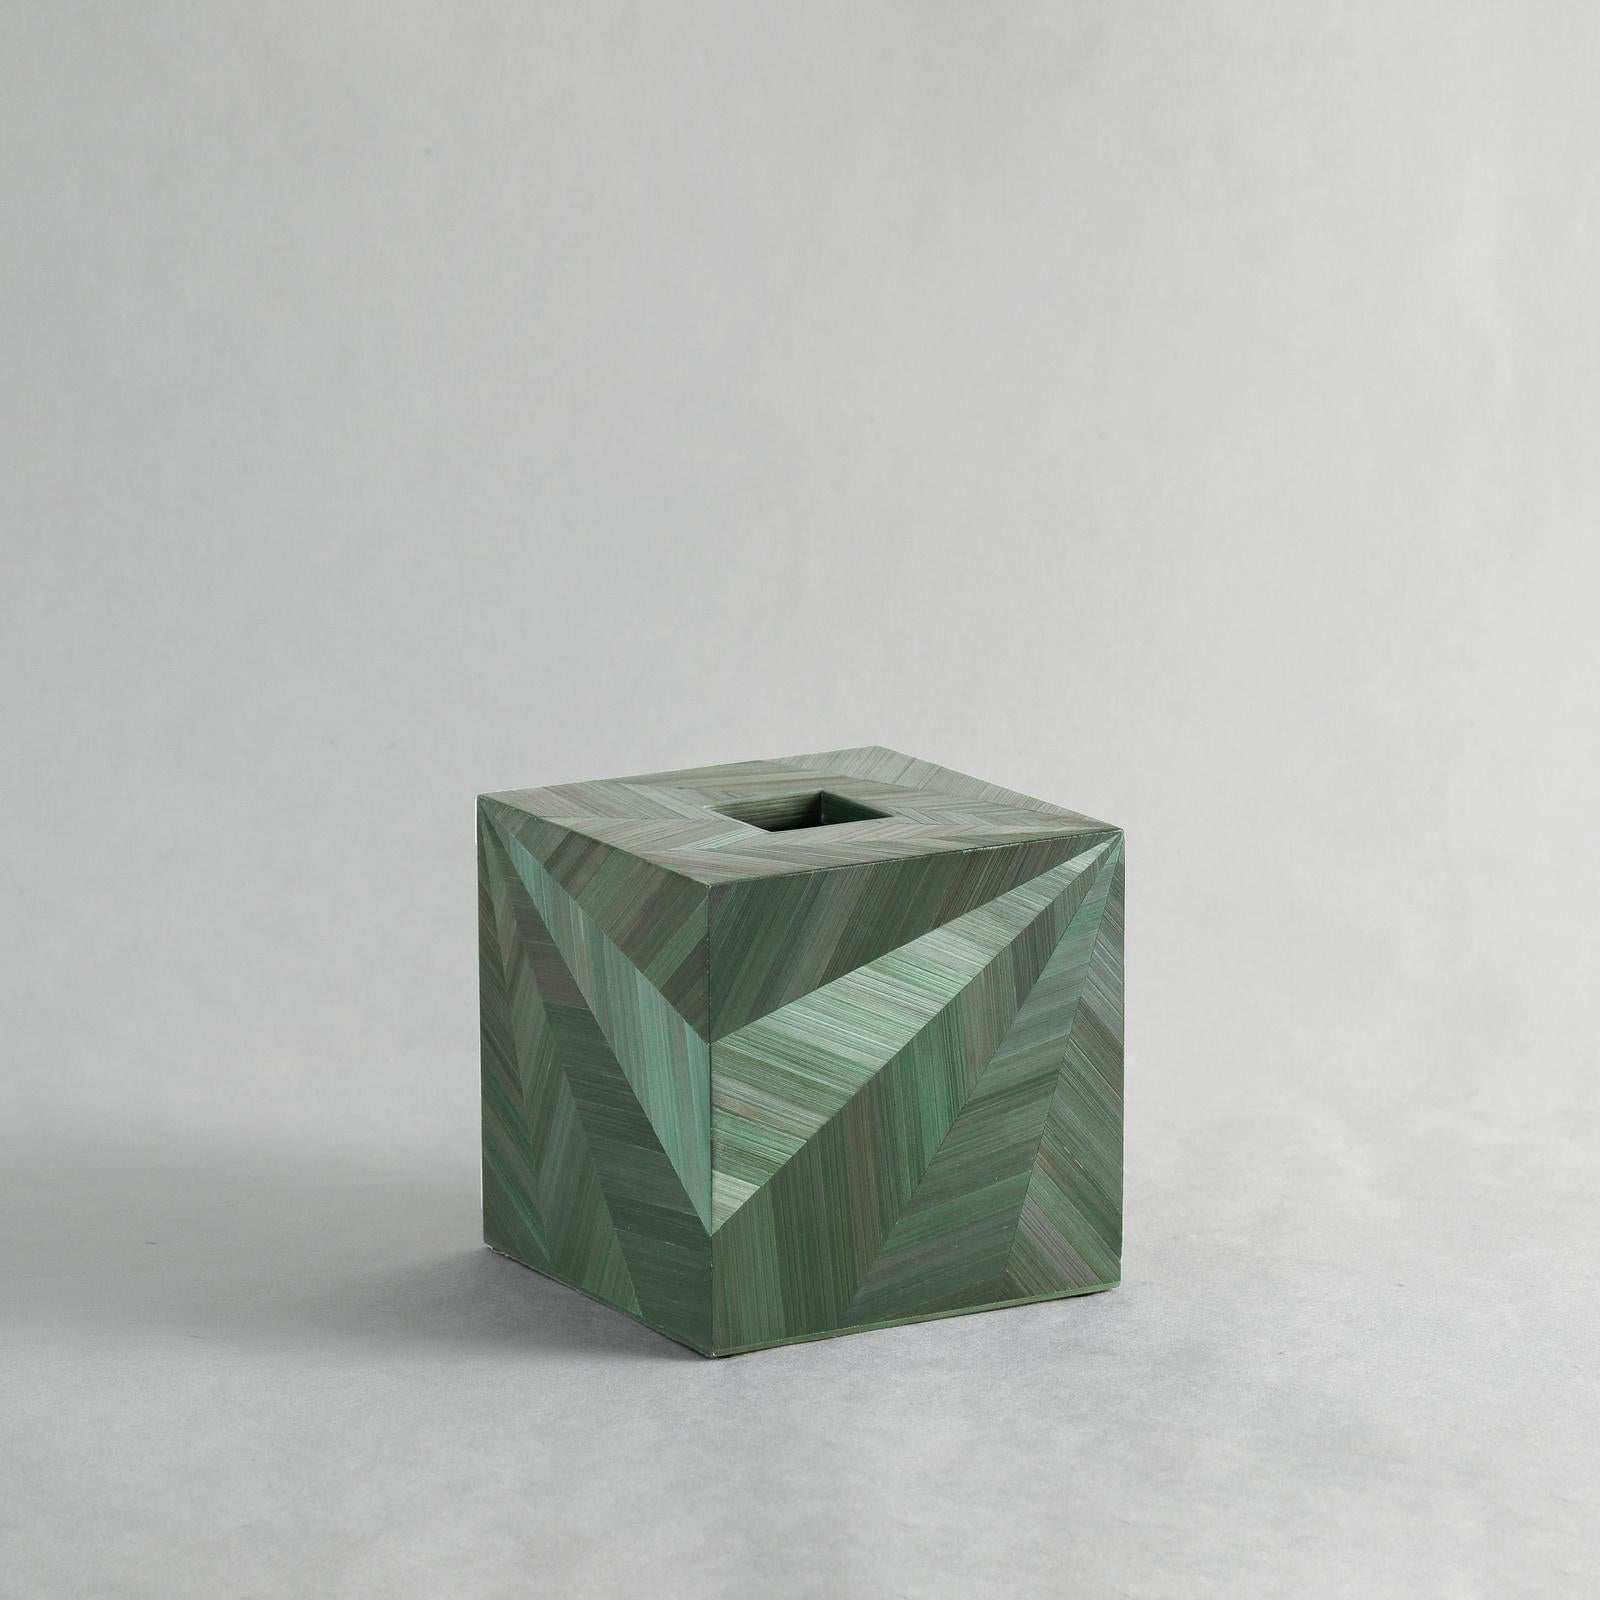 A web of delicately inlaid straw marquetry catches and shines back the light on this tissue box.